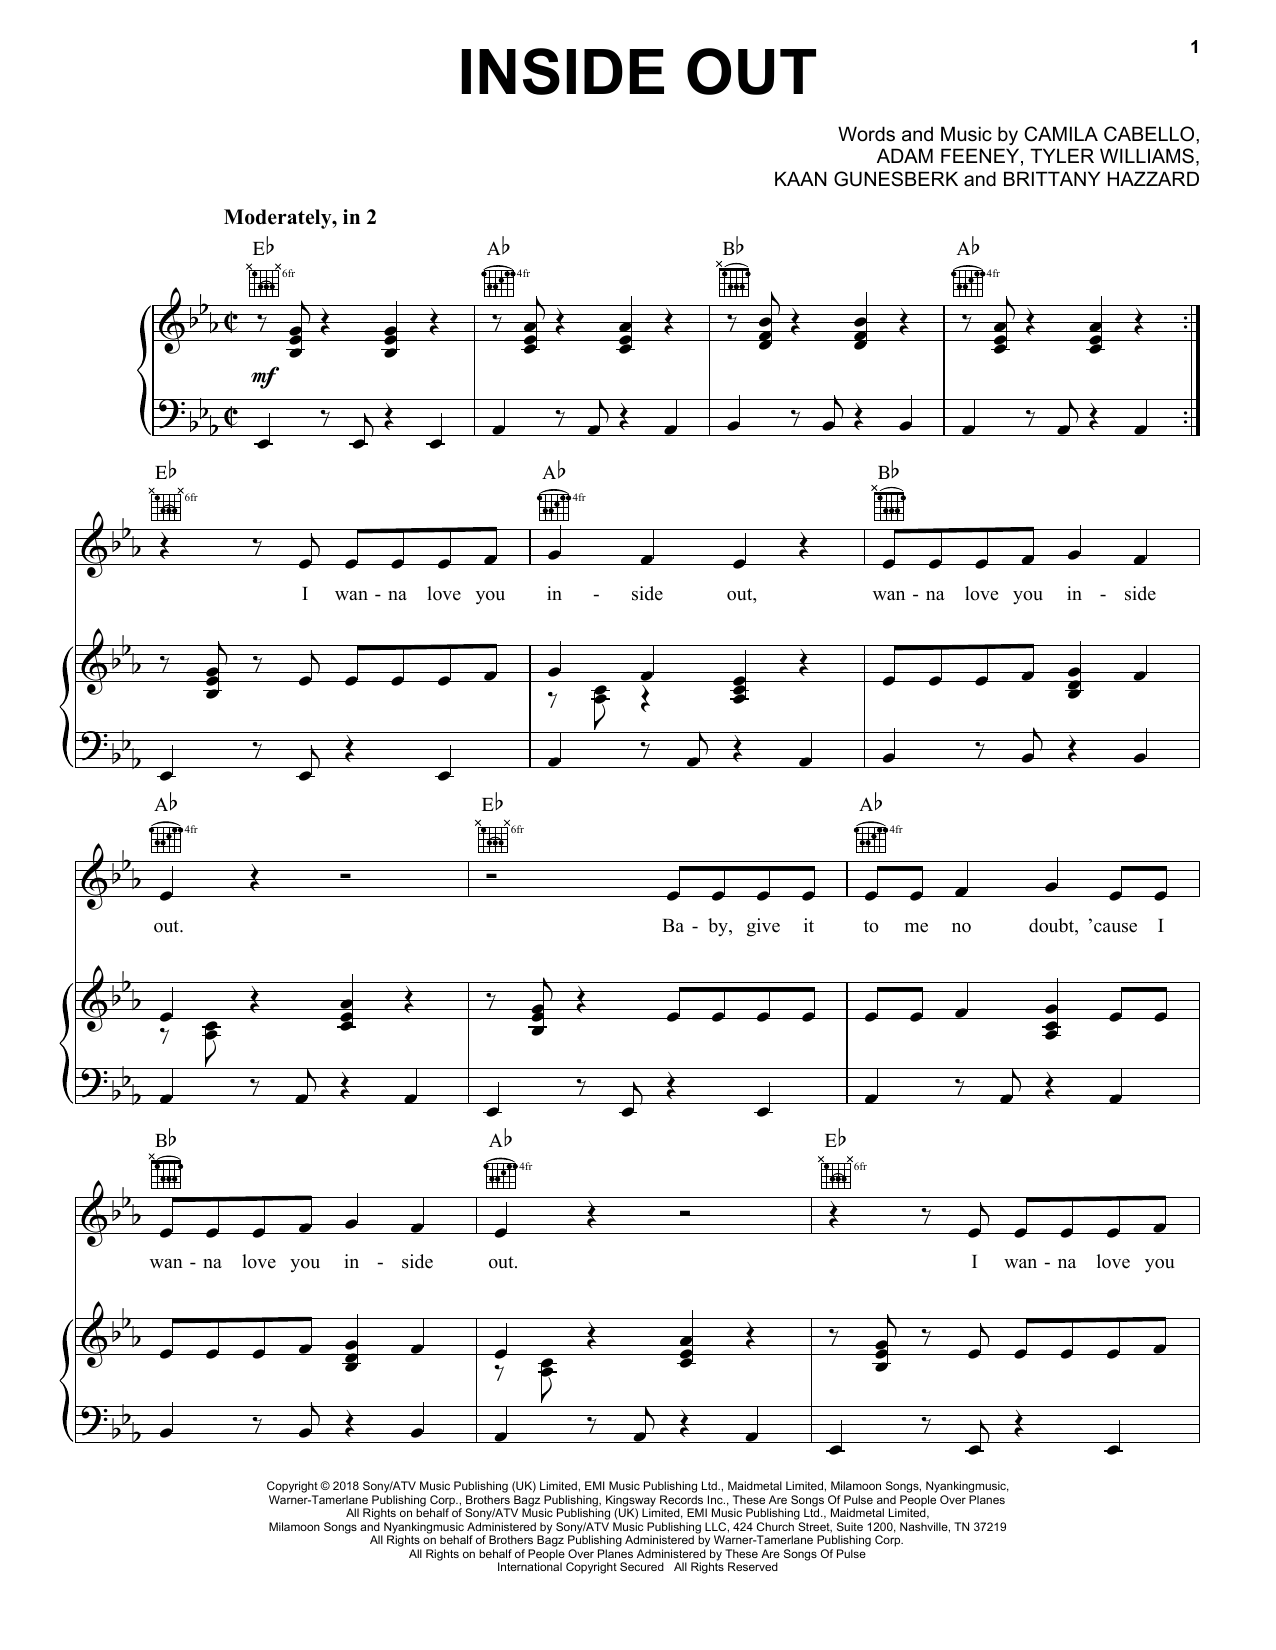 Download Camila Cabello Inside Out Sheet Music